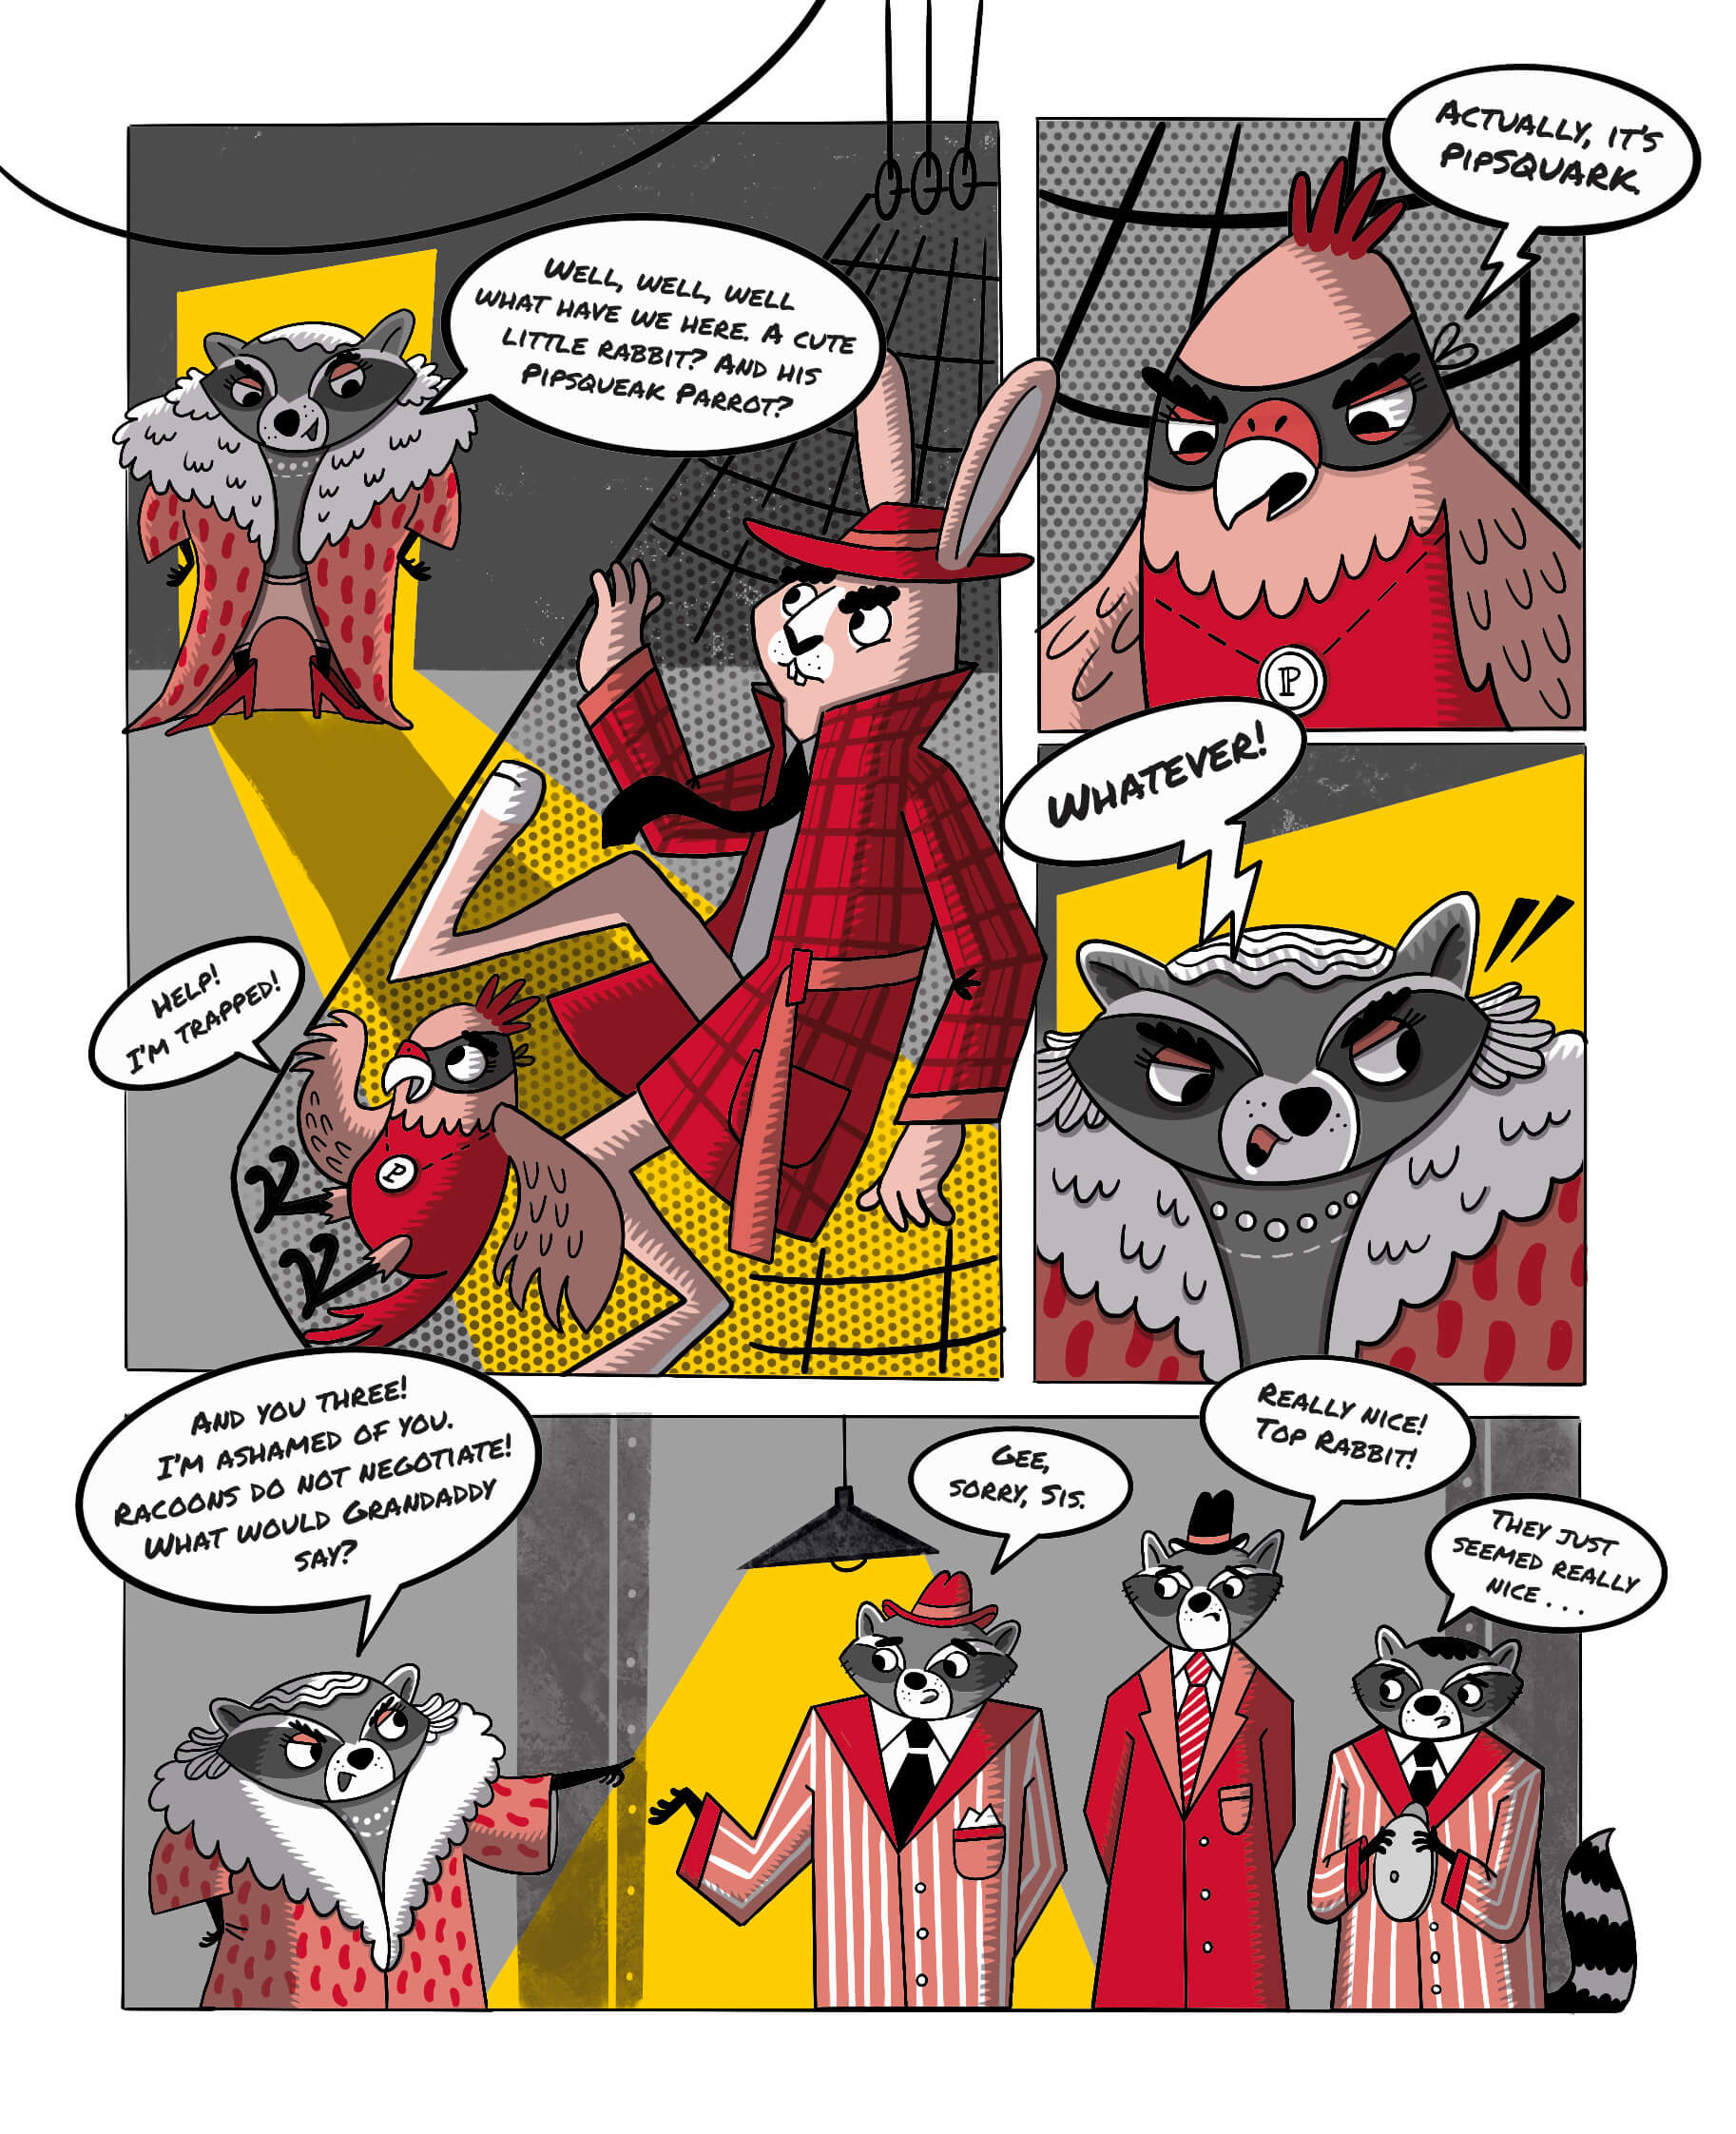 comic art. rabbit and his friend were trapped in a net. a villian racoon is shouting at them.